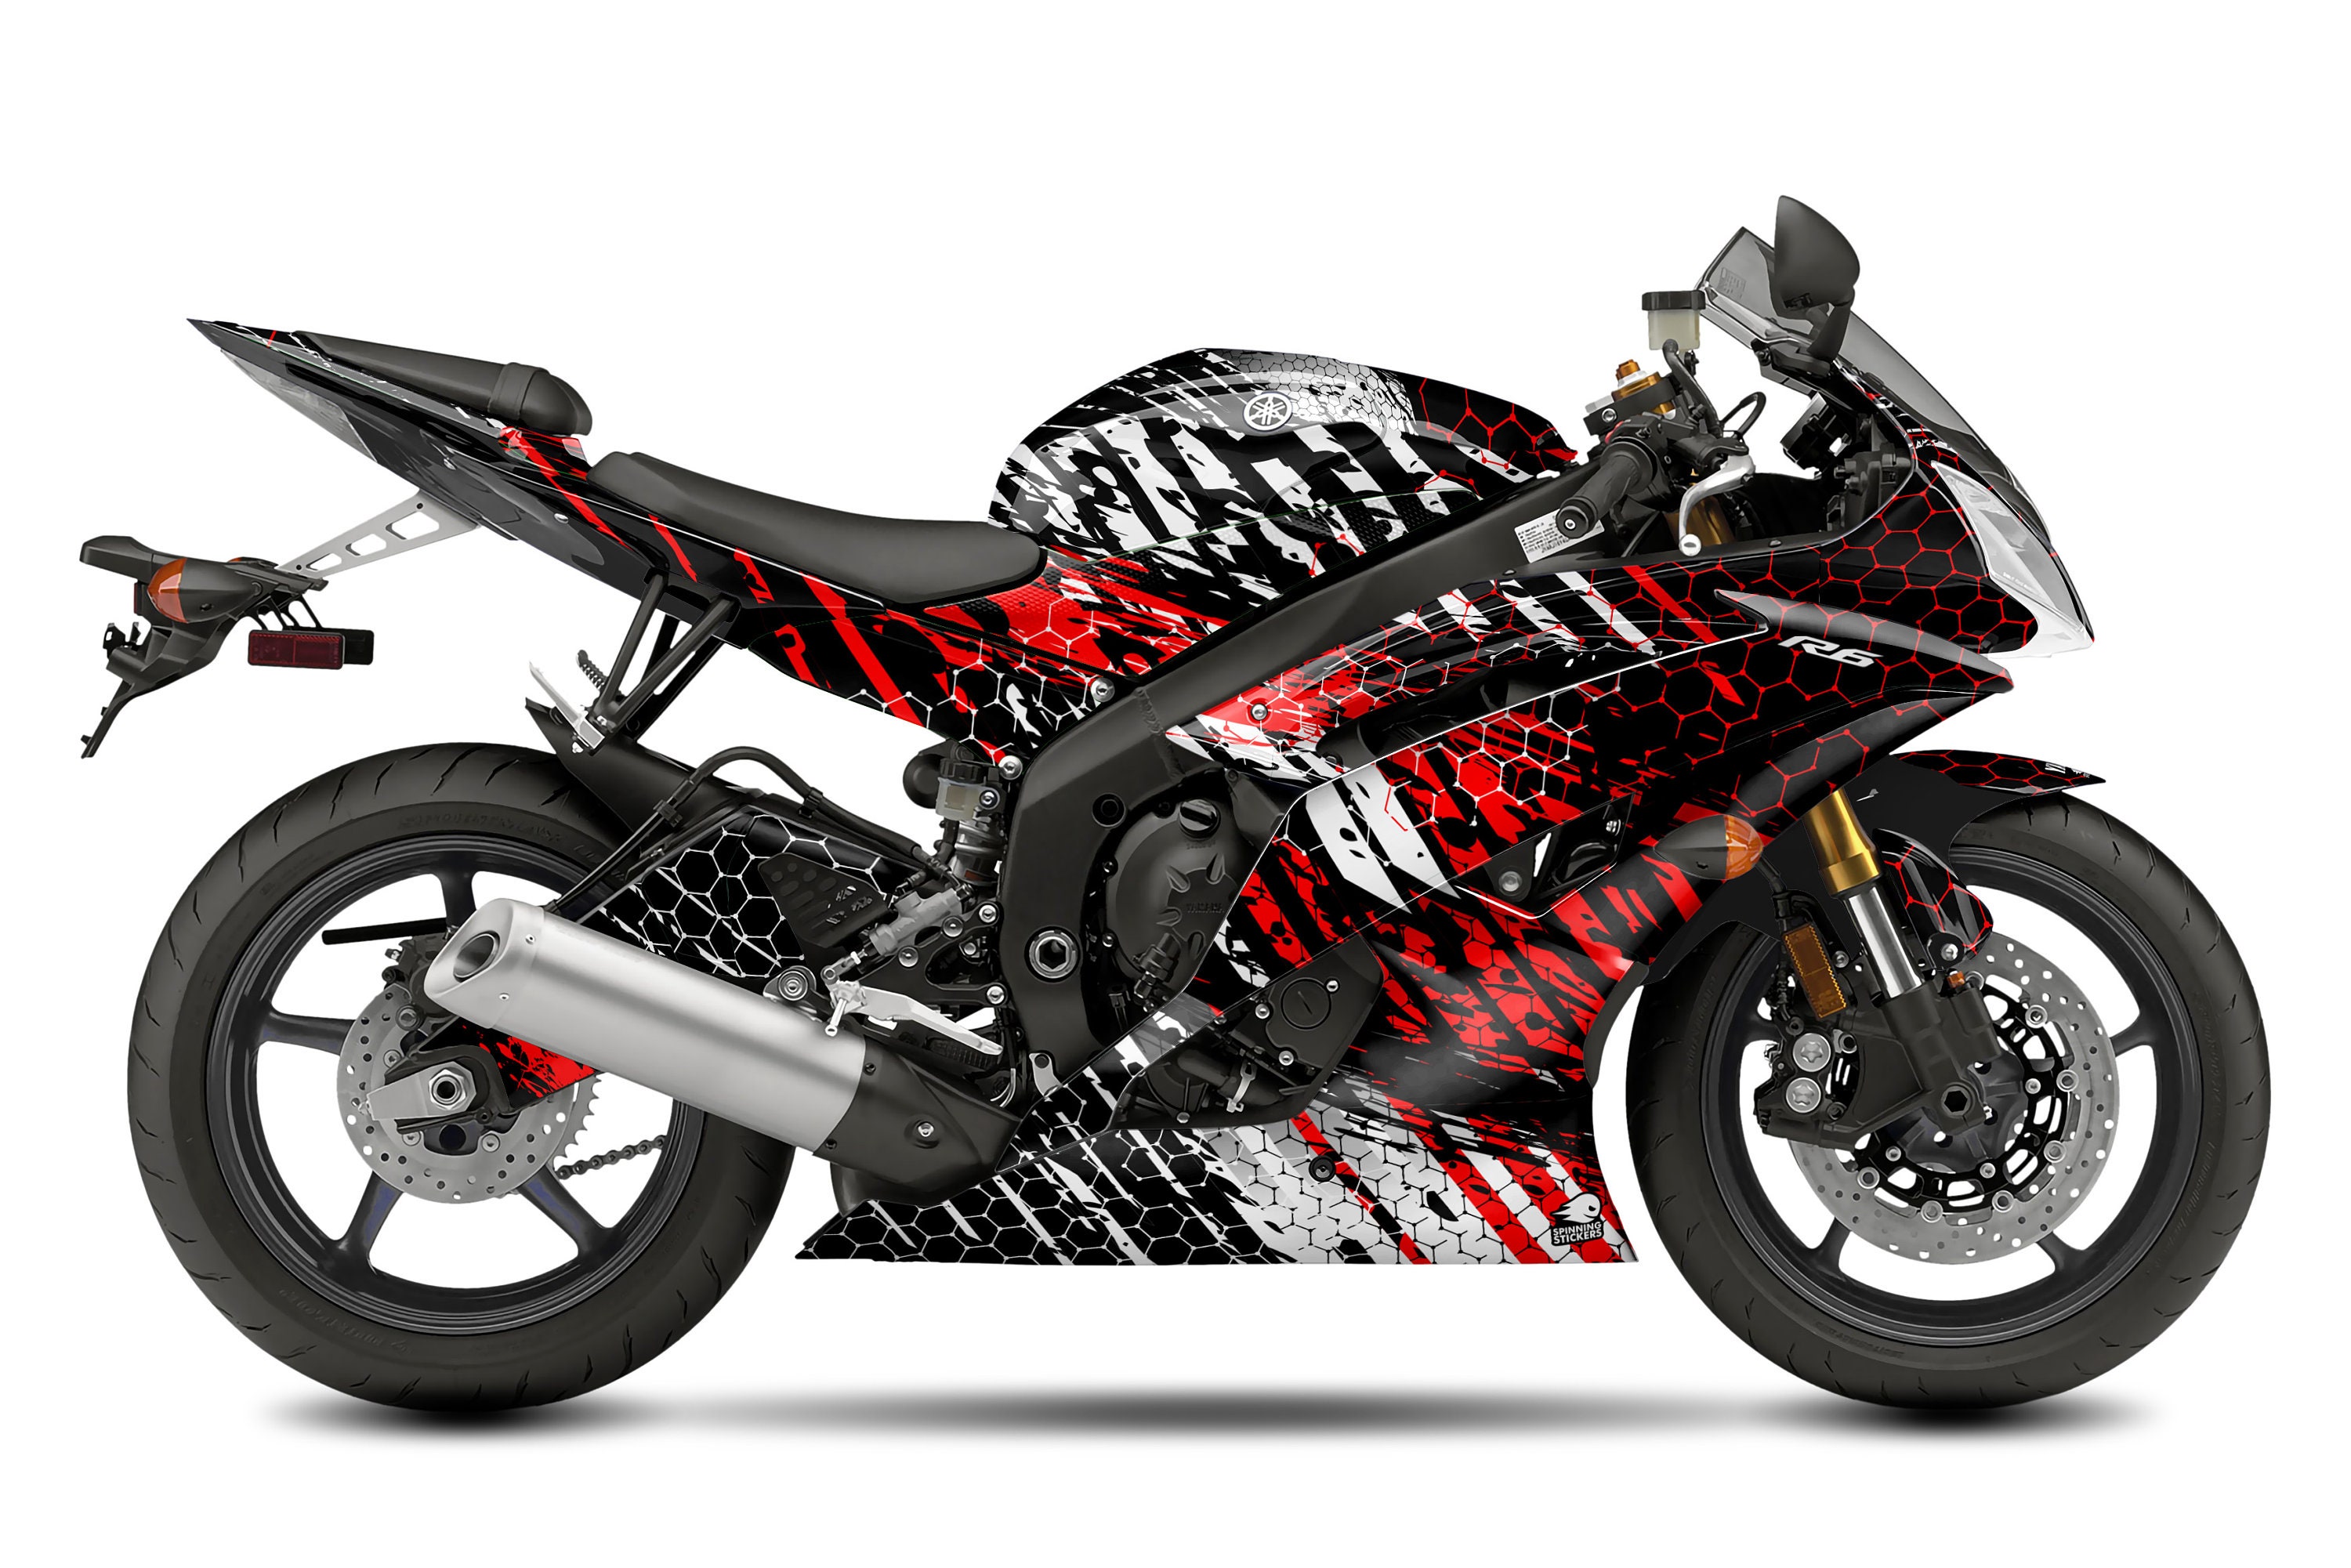 YAMAHA MT07 racetrack decals kit custom made to your team colors, sponsors,  your racing number.